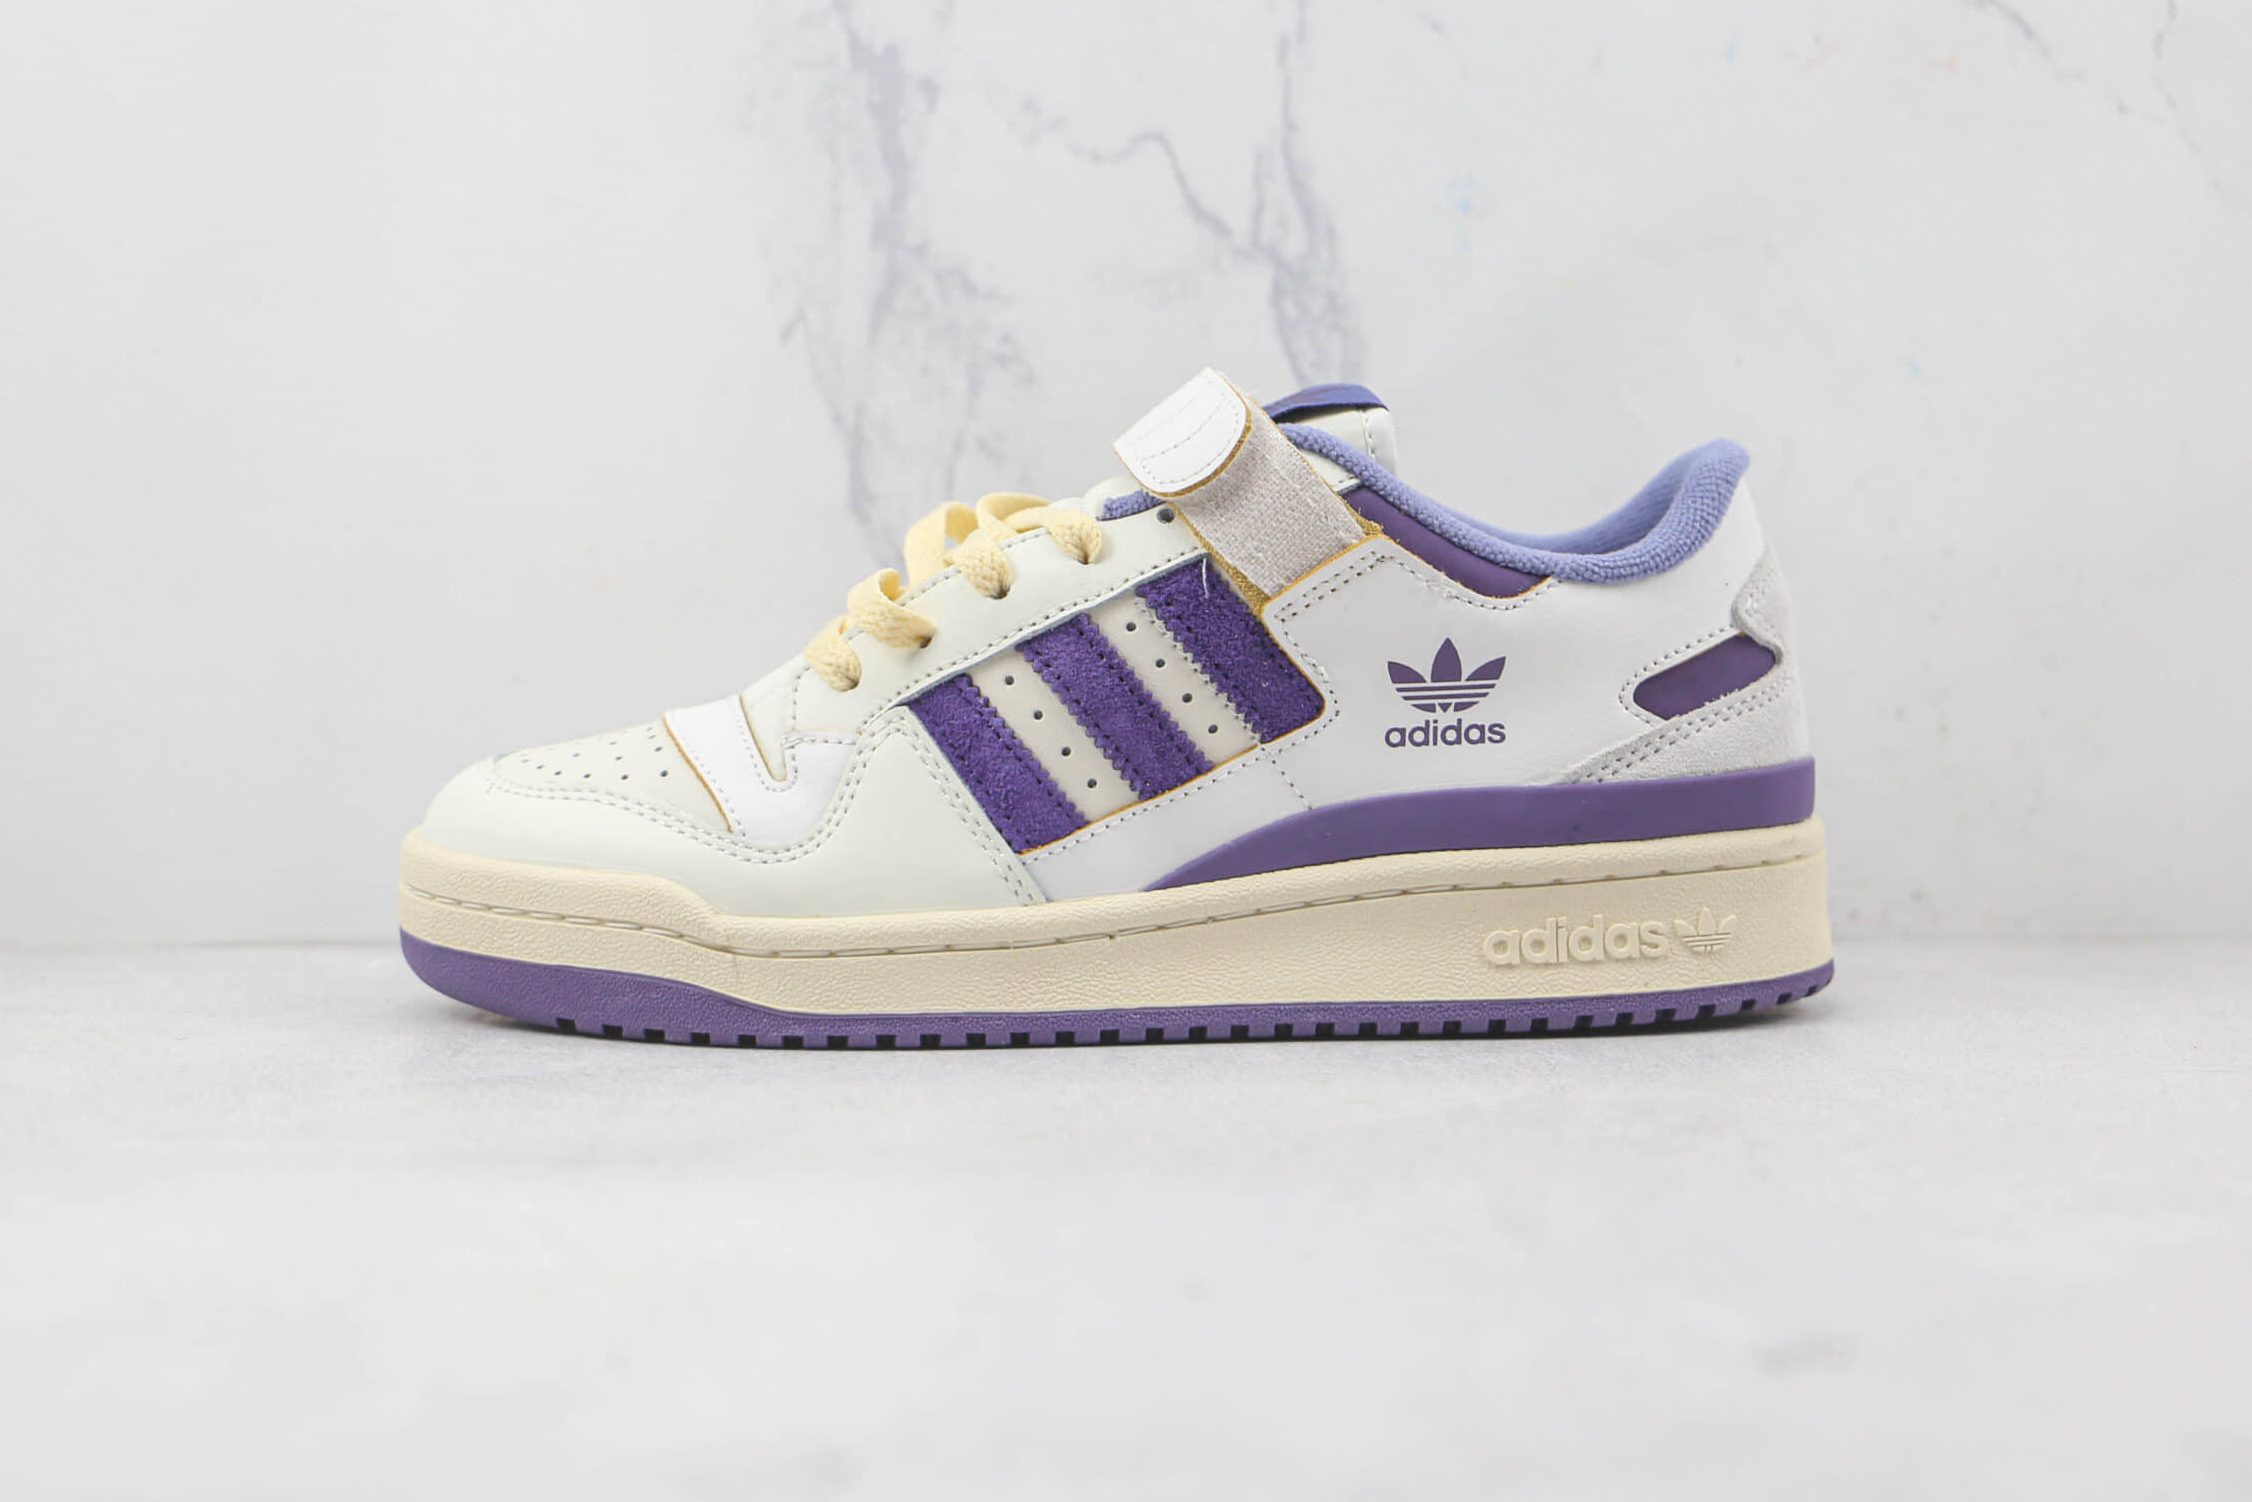 Adidas Forum 84 Low in White College Purple - GX4535